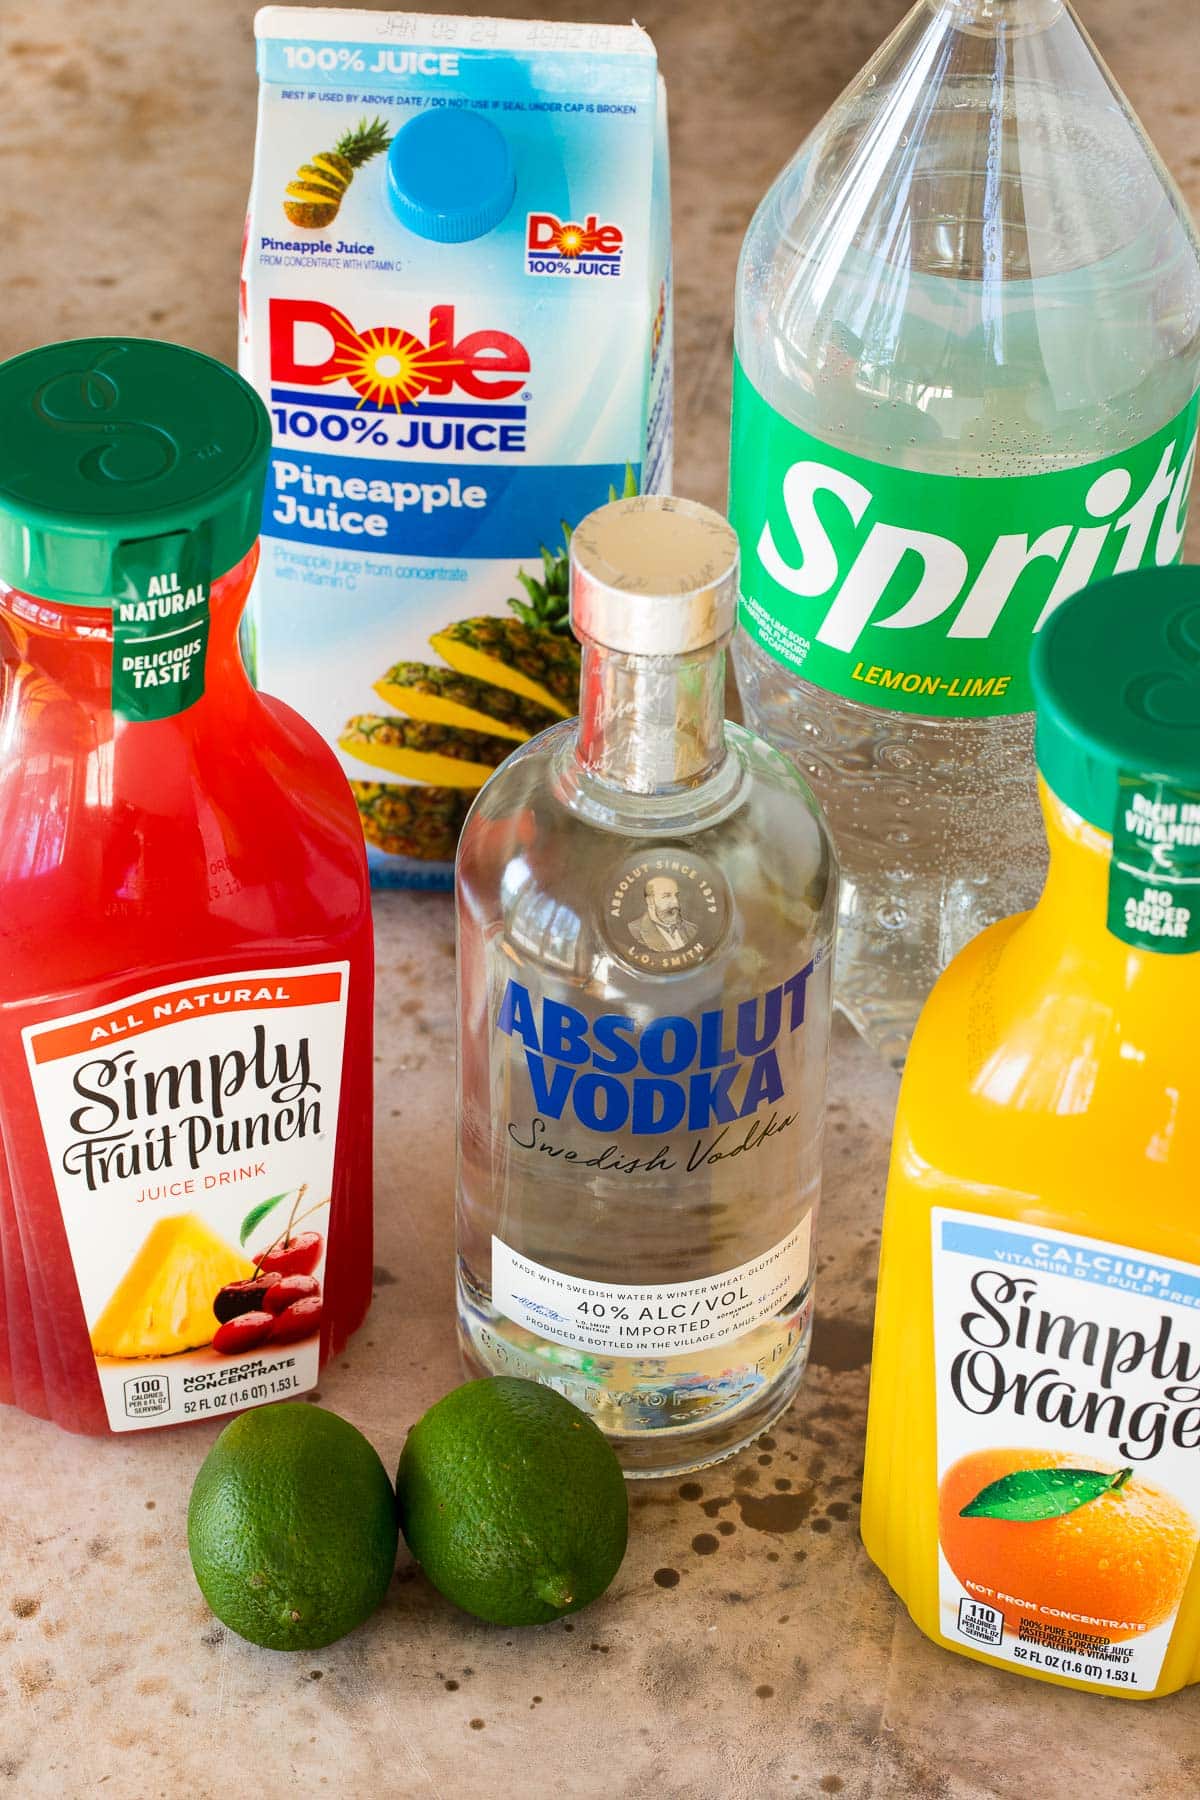 Bottles of juices, soda and vodka.